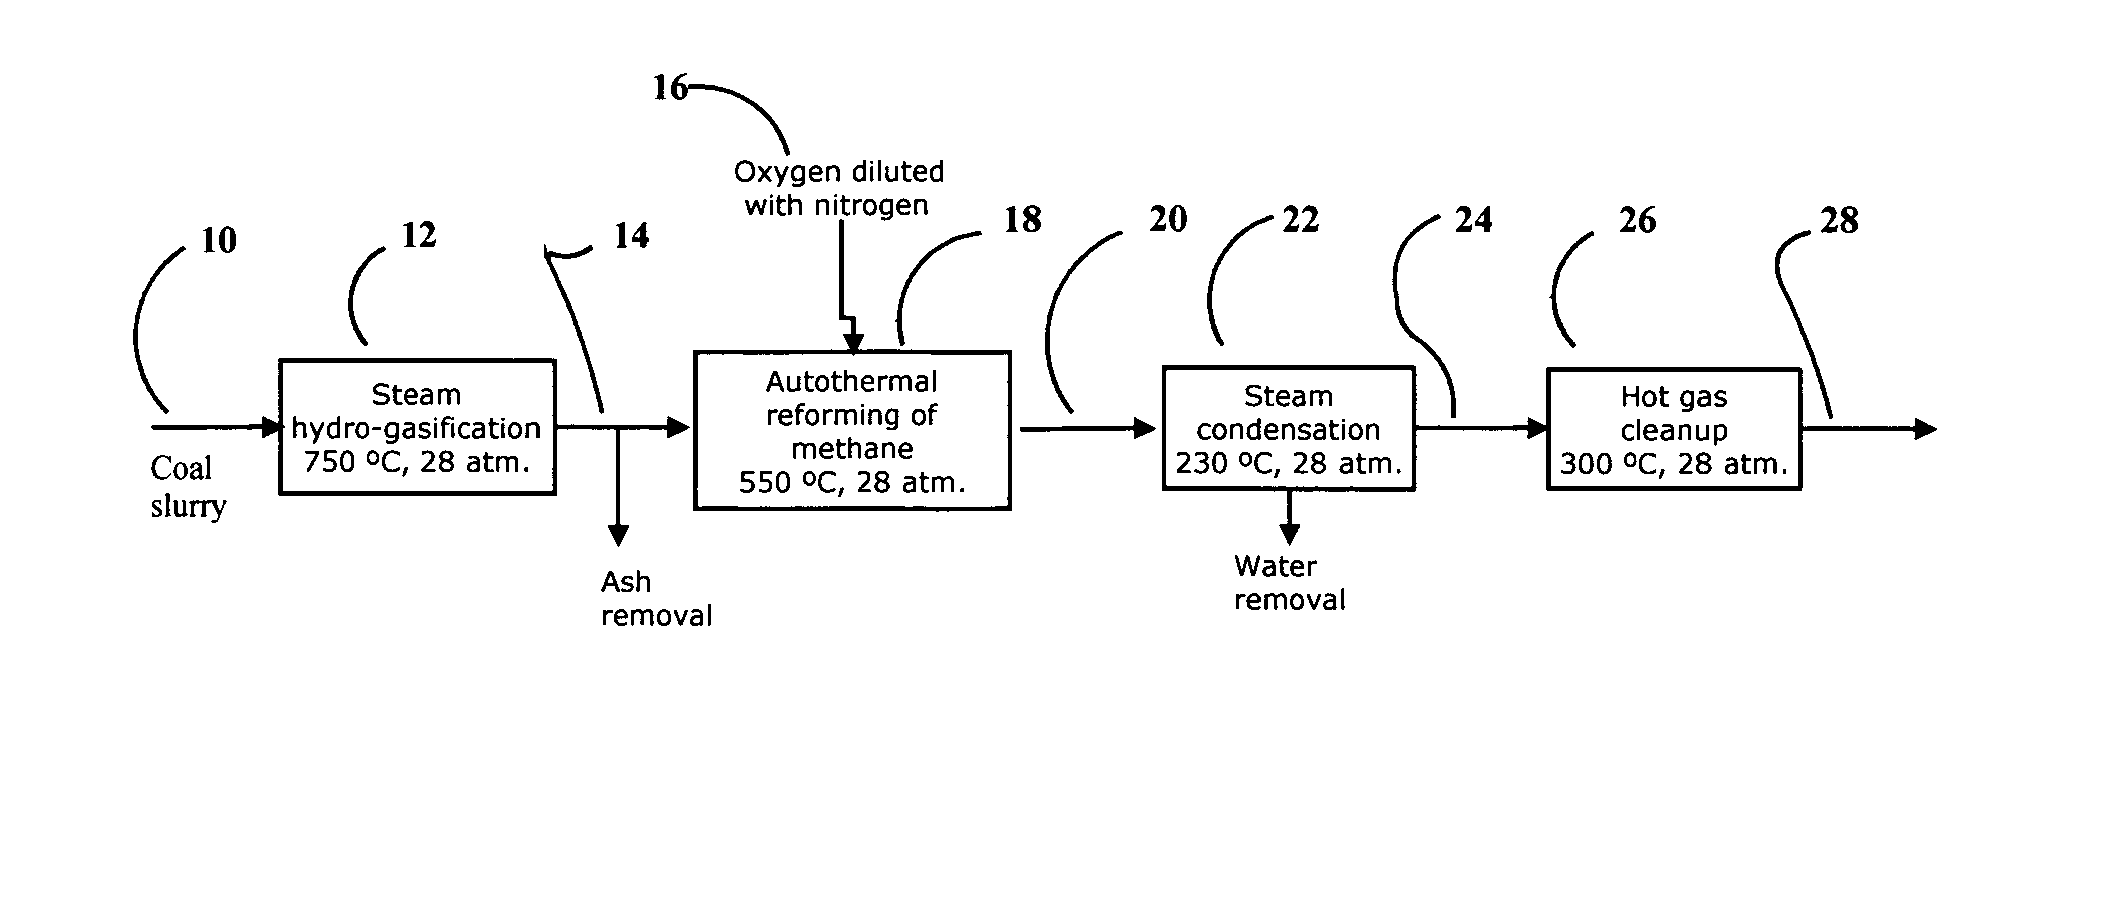 Process for enhancing the operability of hot gas cleanup for the production of synthesis gas from steam-hydrogasification producer gas